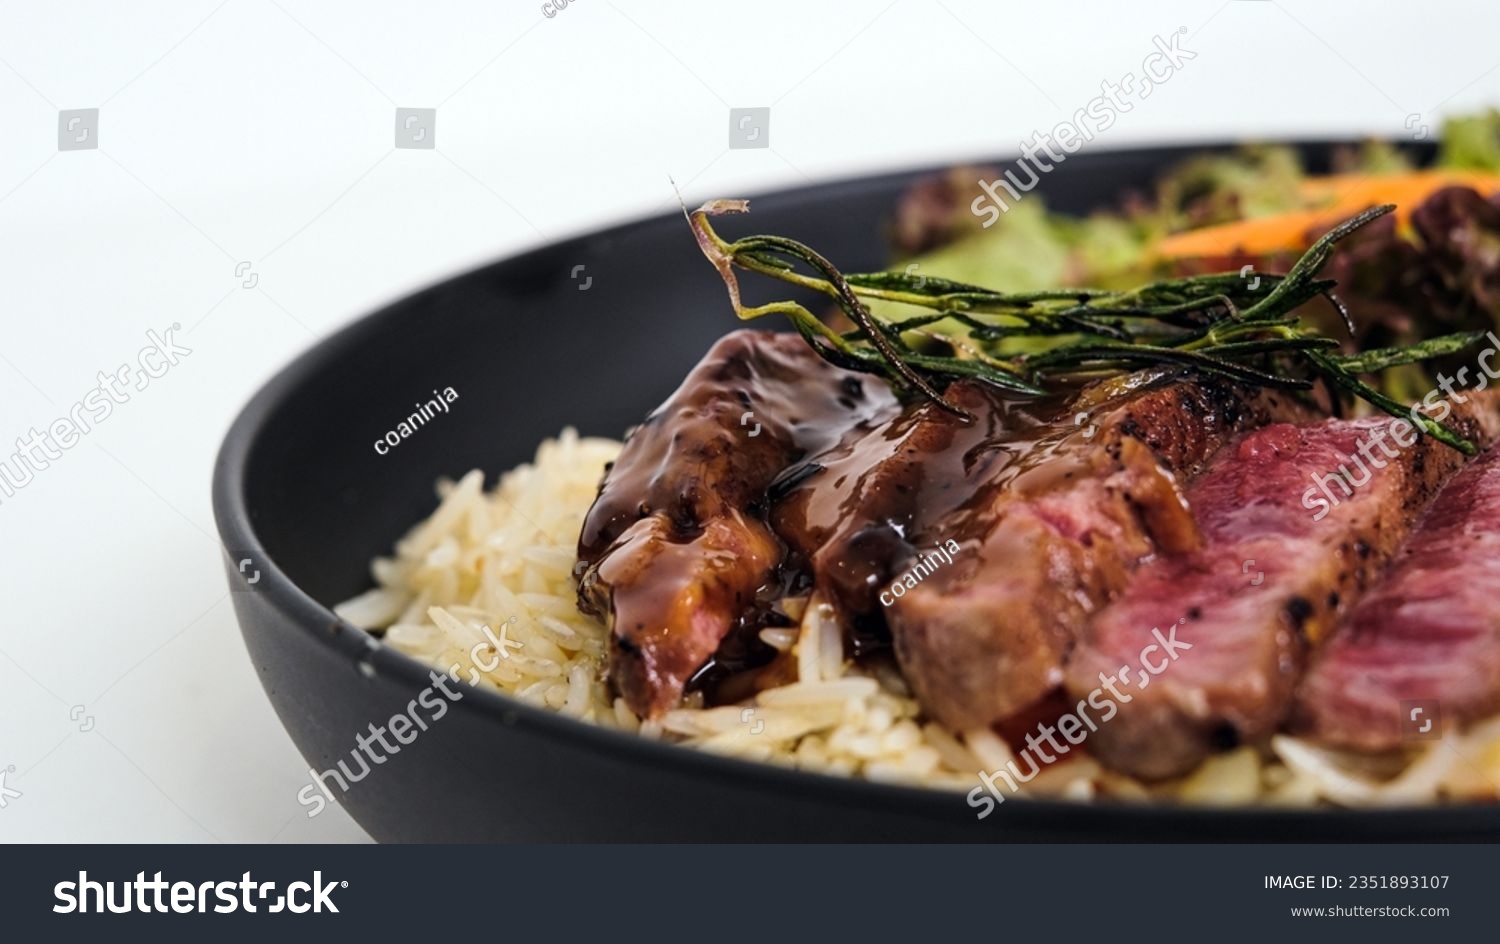 Juicy New York strip beef steak with special sauce, buttery rice, and vegetables #2351893107